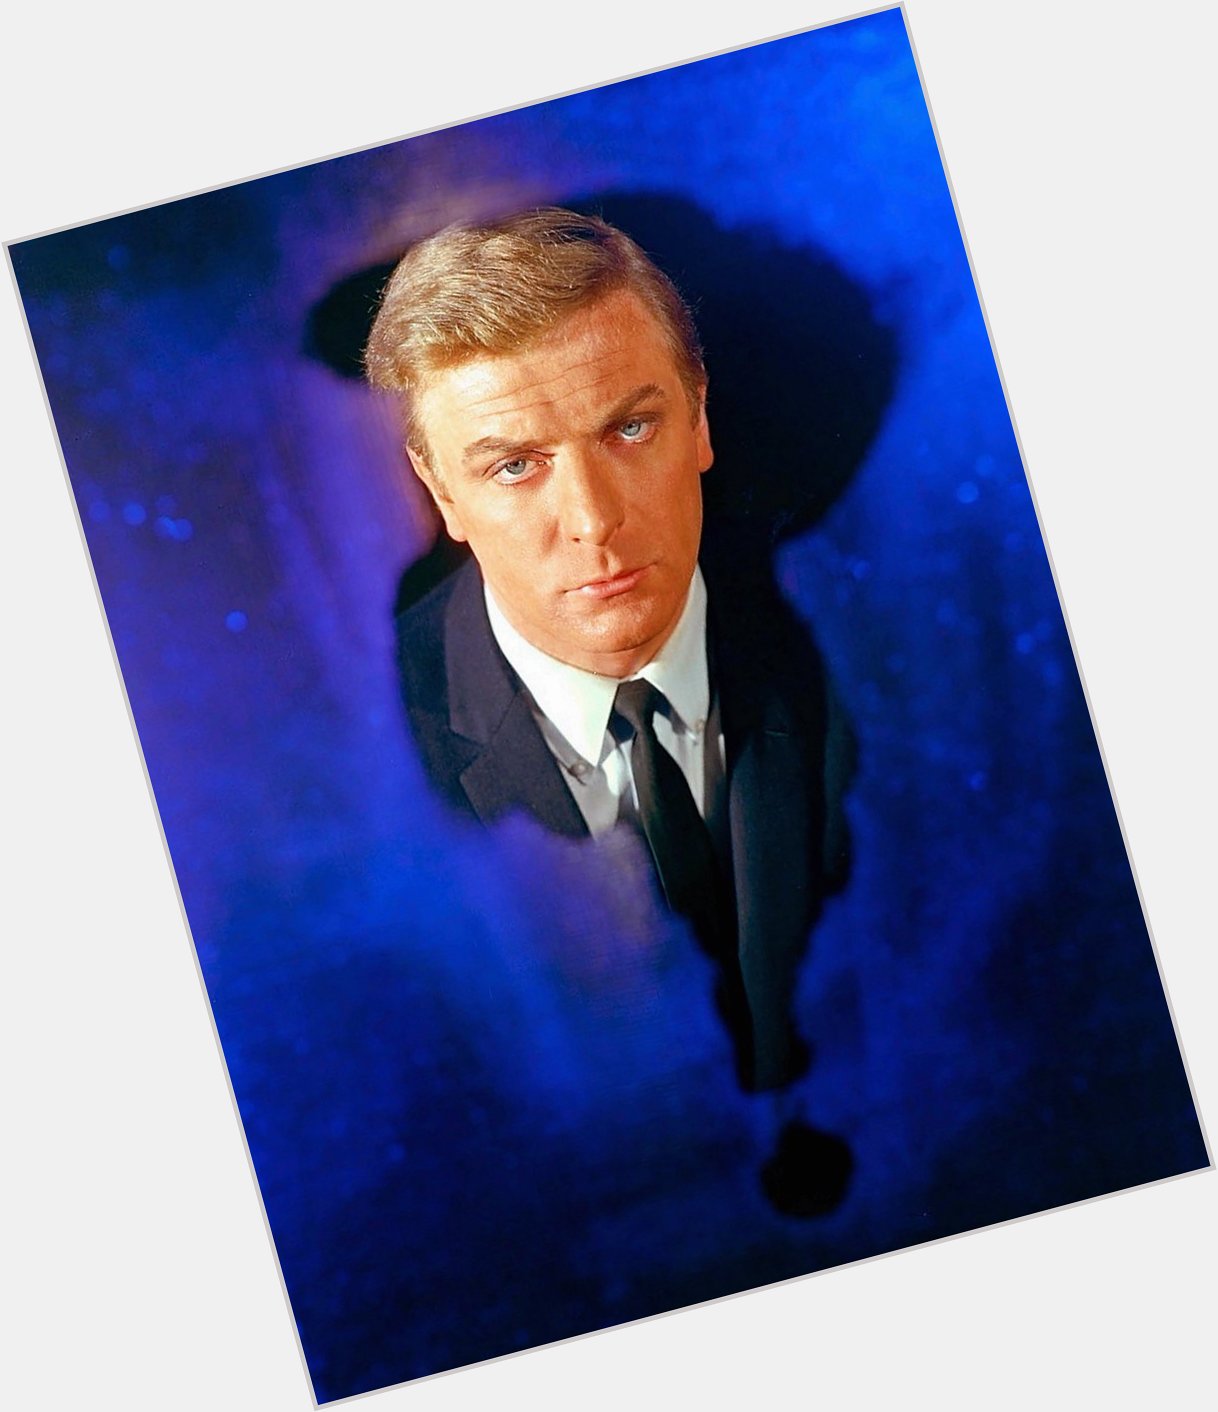 Happy Birthday Sir Michael Caine!
He is 86 today. 